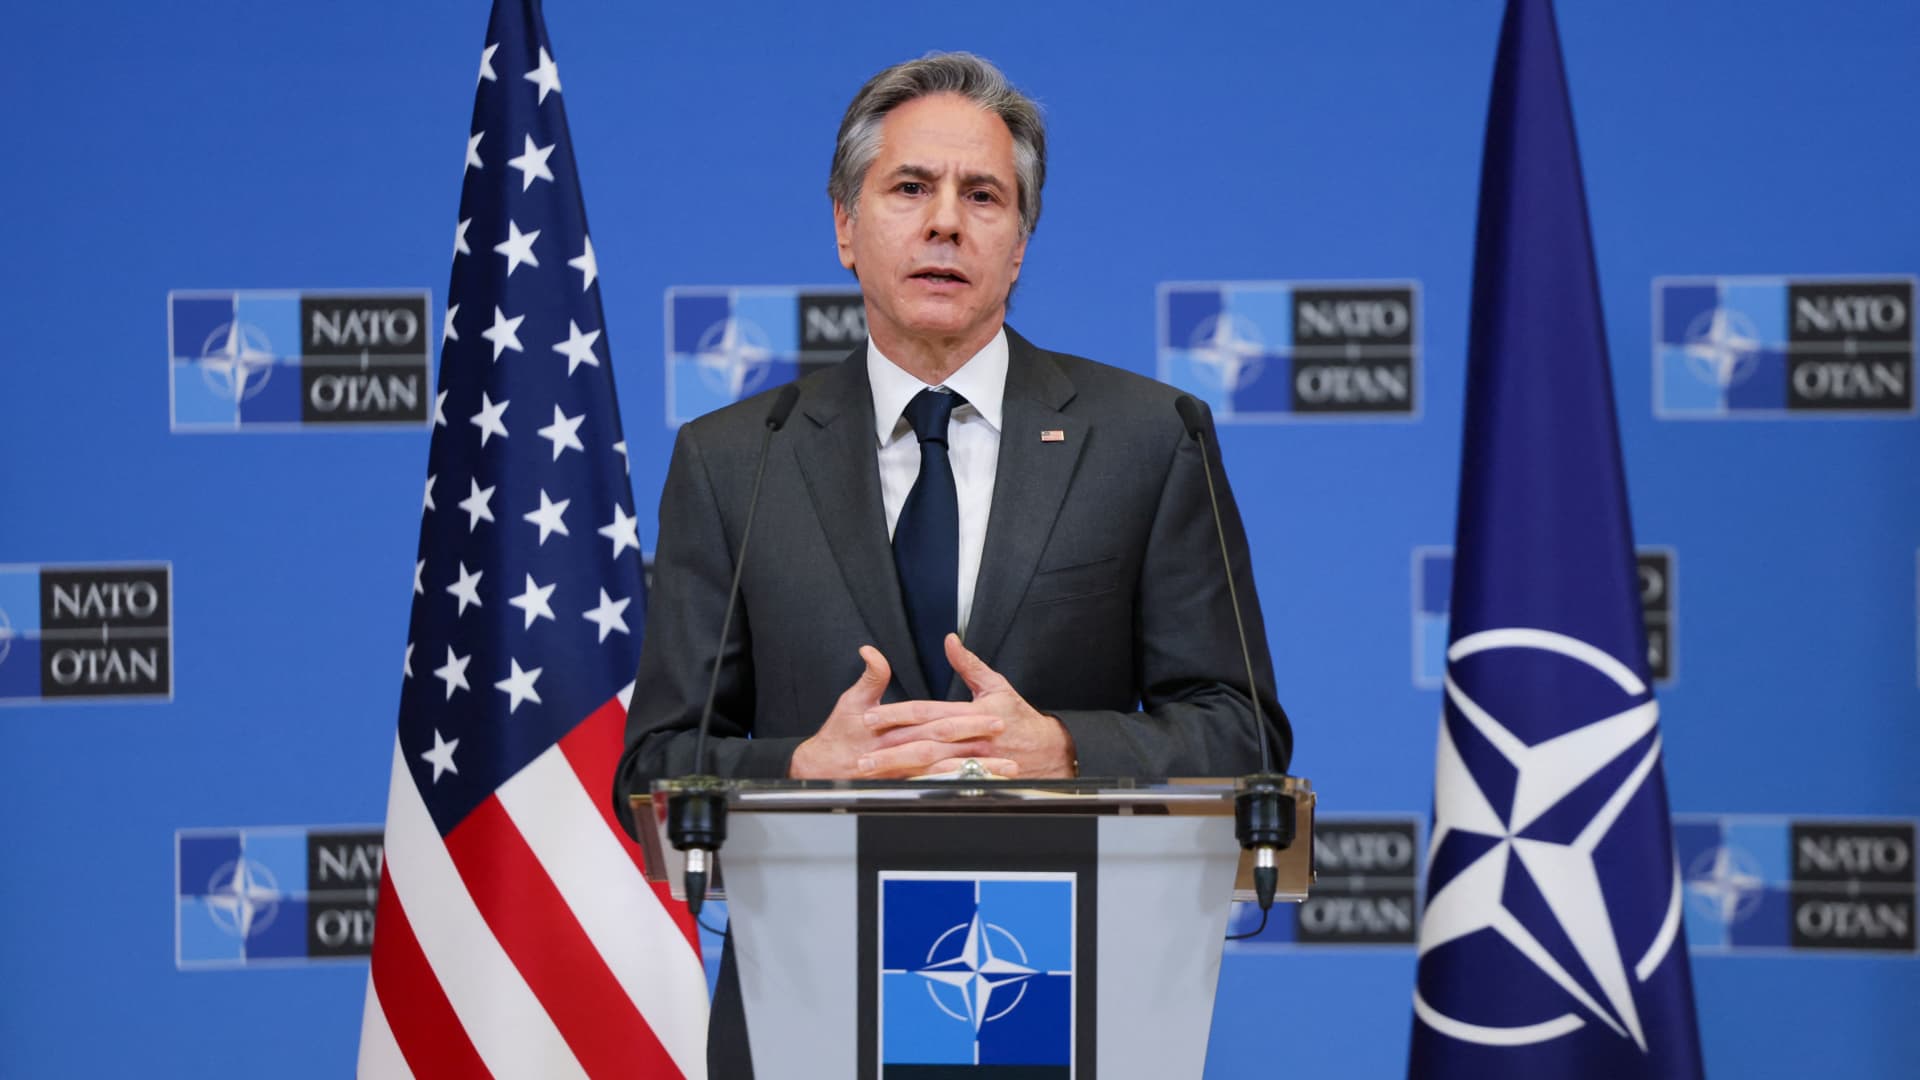 US Secretary of State Antony Blinken speaks to the media after a NATO foreign ministers meeting, amid Russia's invasion of Ukraine, at NATO headquarters in Brussels, Belgium April 7, 2022.